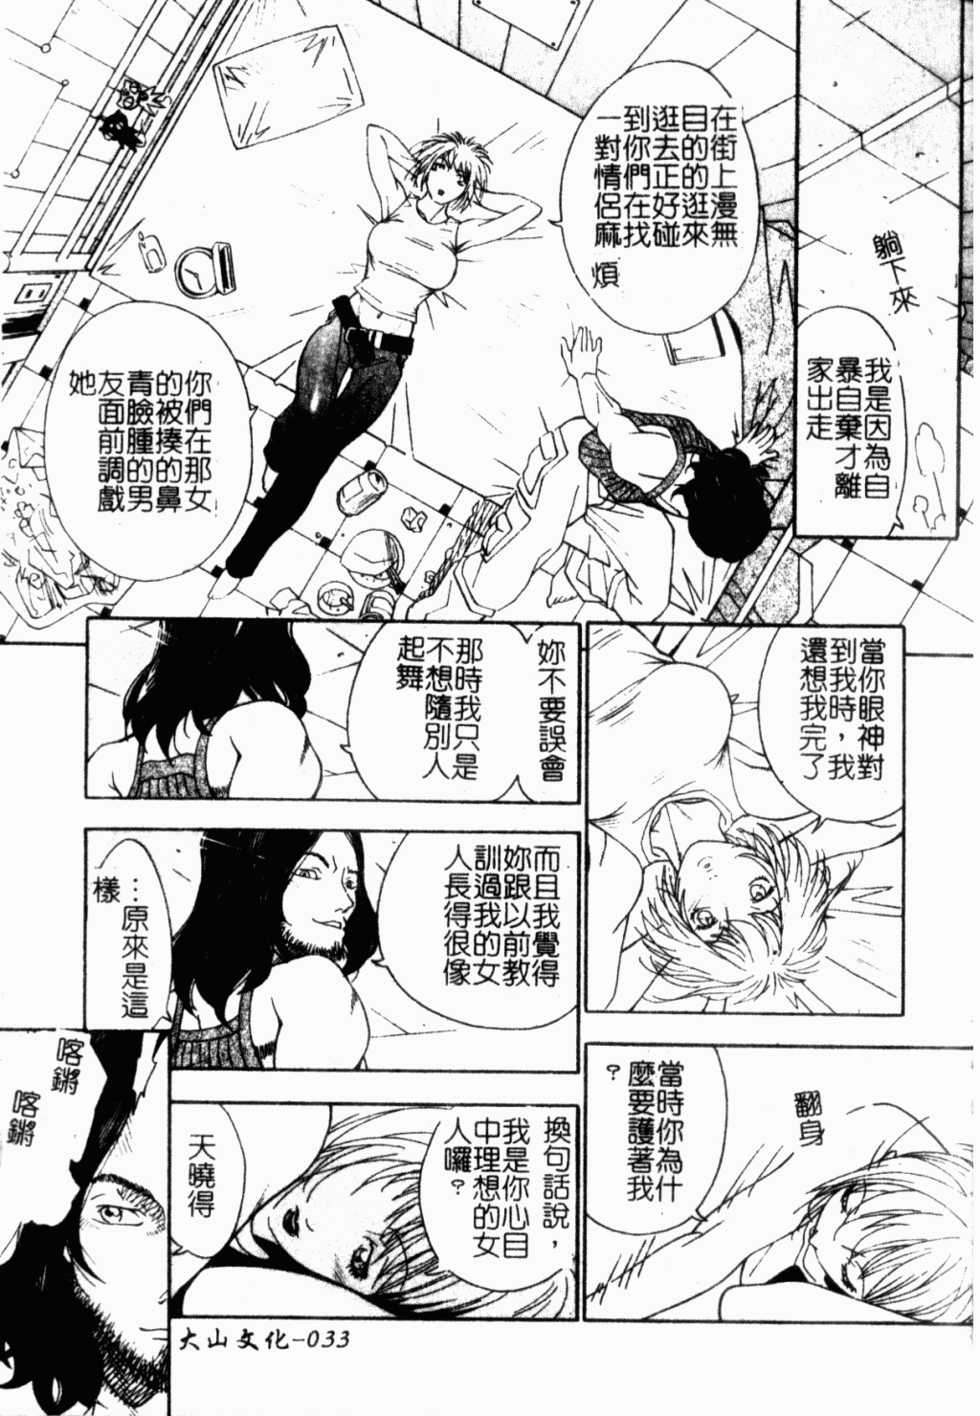 [Anthology] Rinkan & Rankou Excellent | 輪姦&乱交 精選集 [Chinese] - Page 32